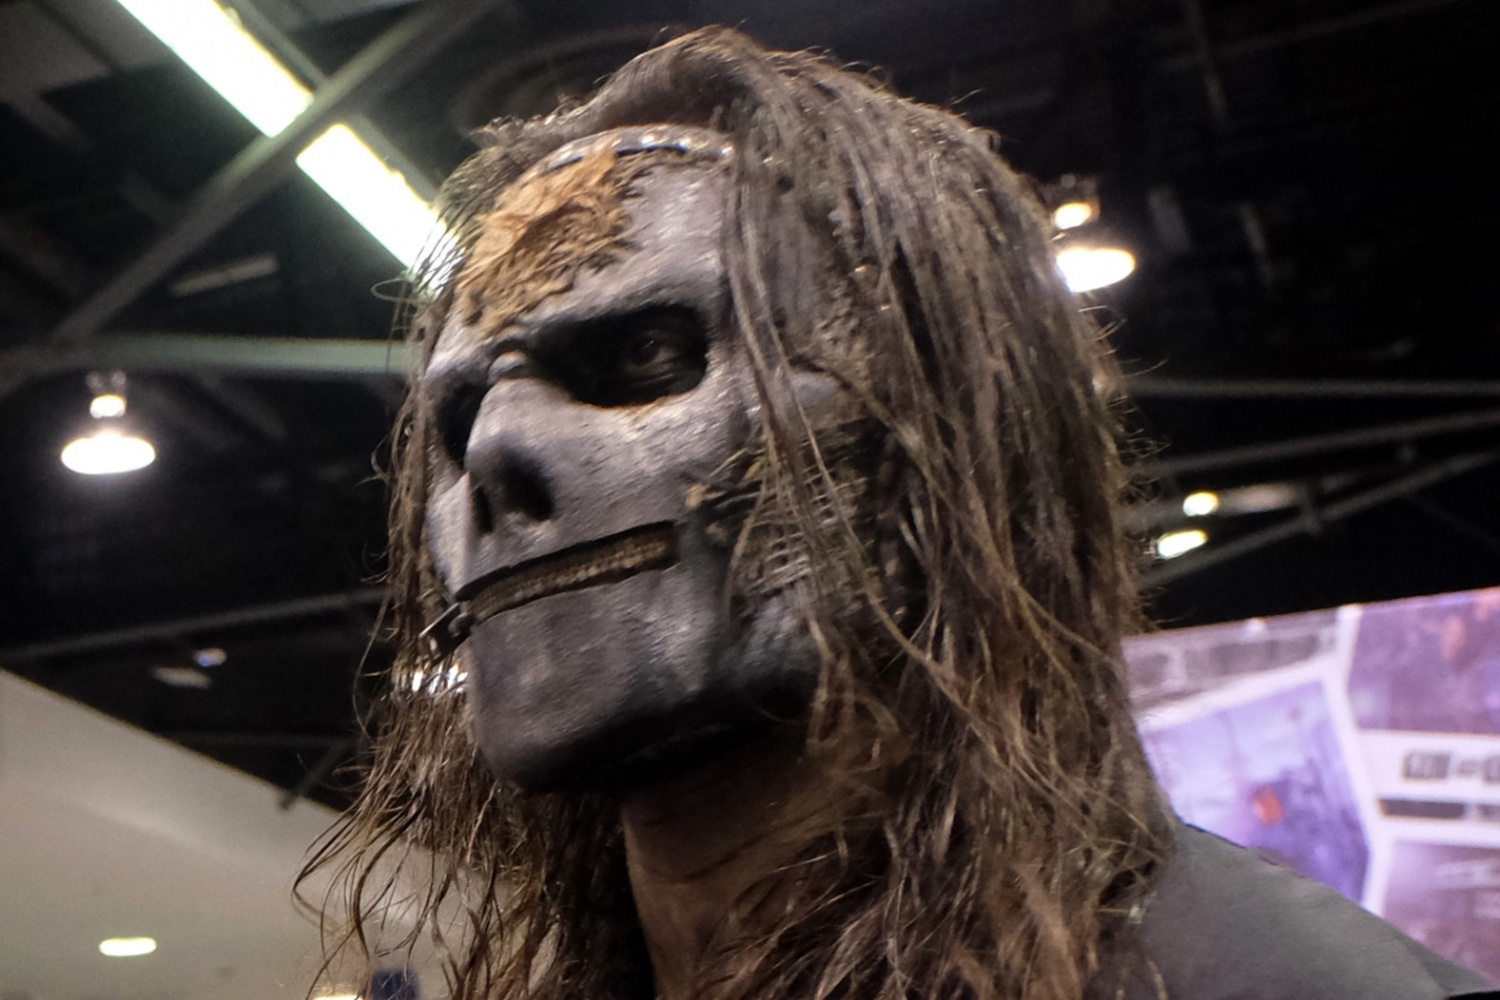 Why Did Slipknot Oust Jay Weinberg? Clown Hints at Possible Reason